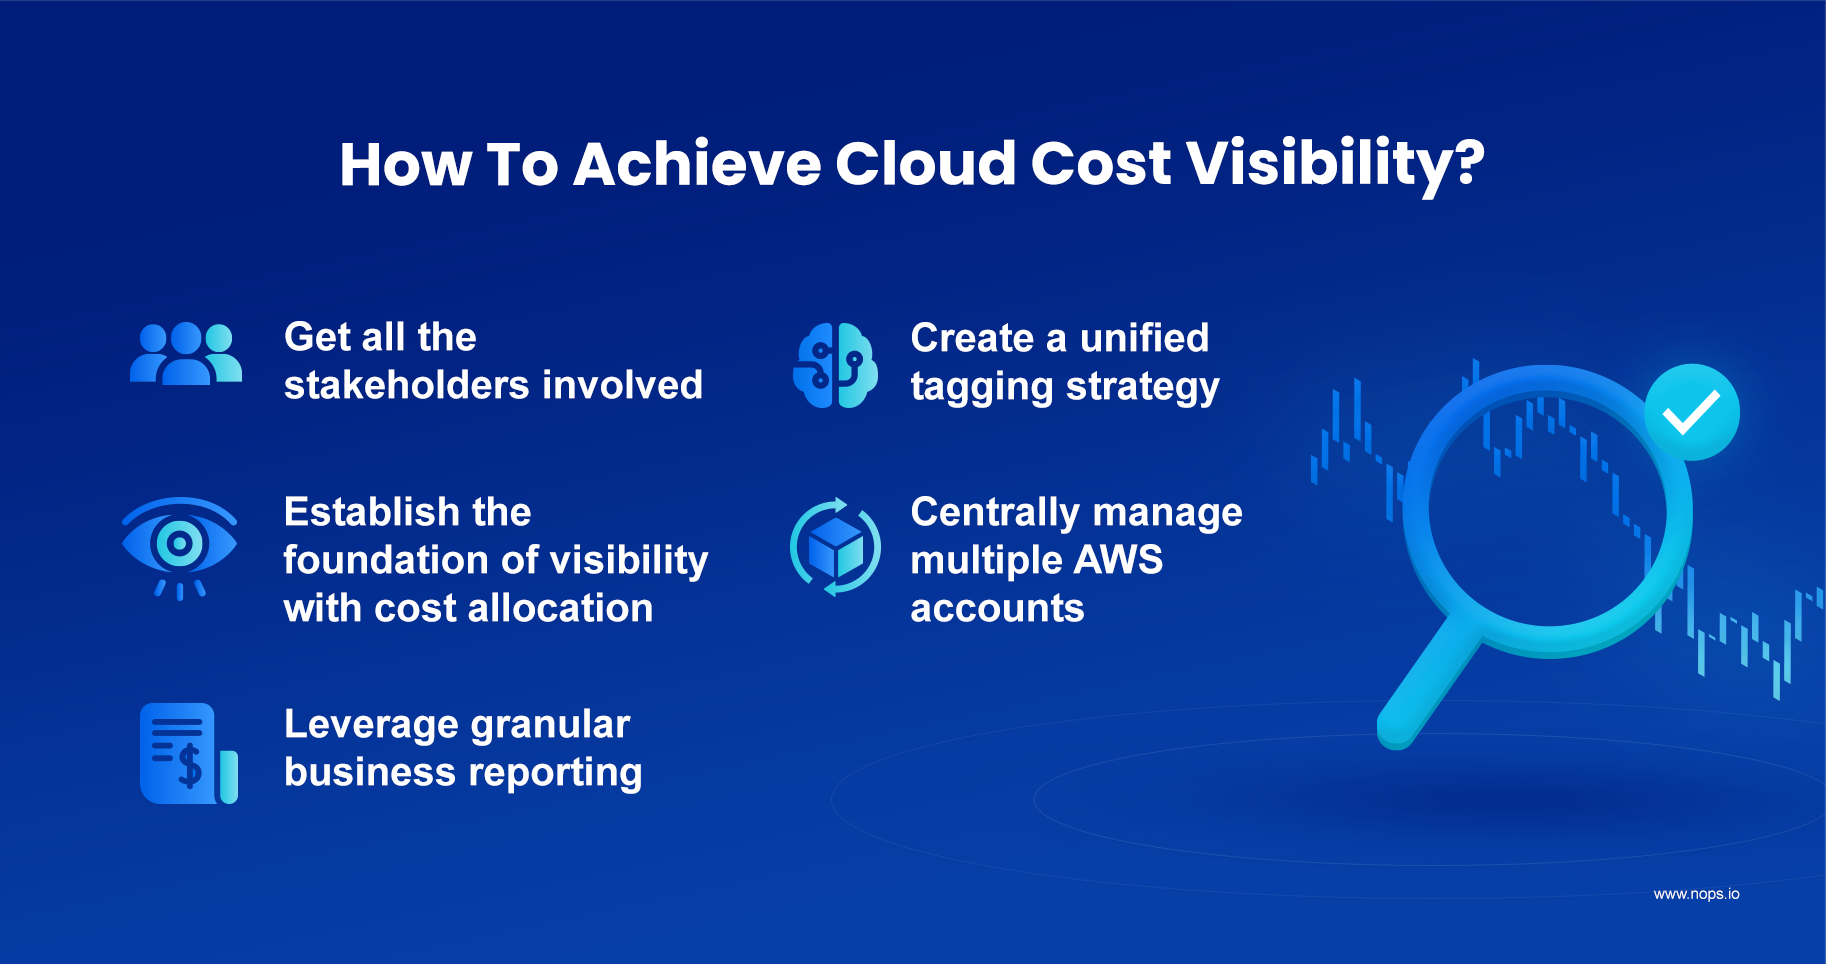 How to achieve cloud cost visibility